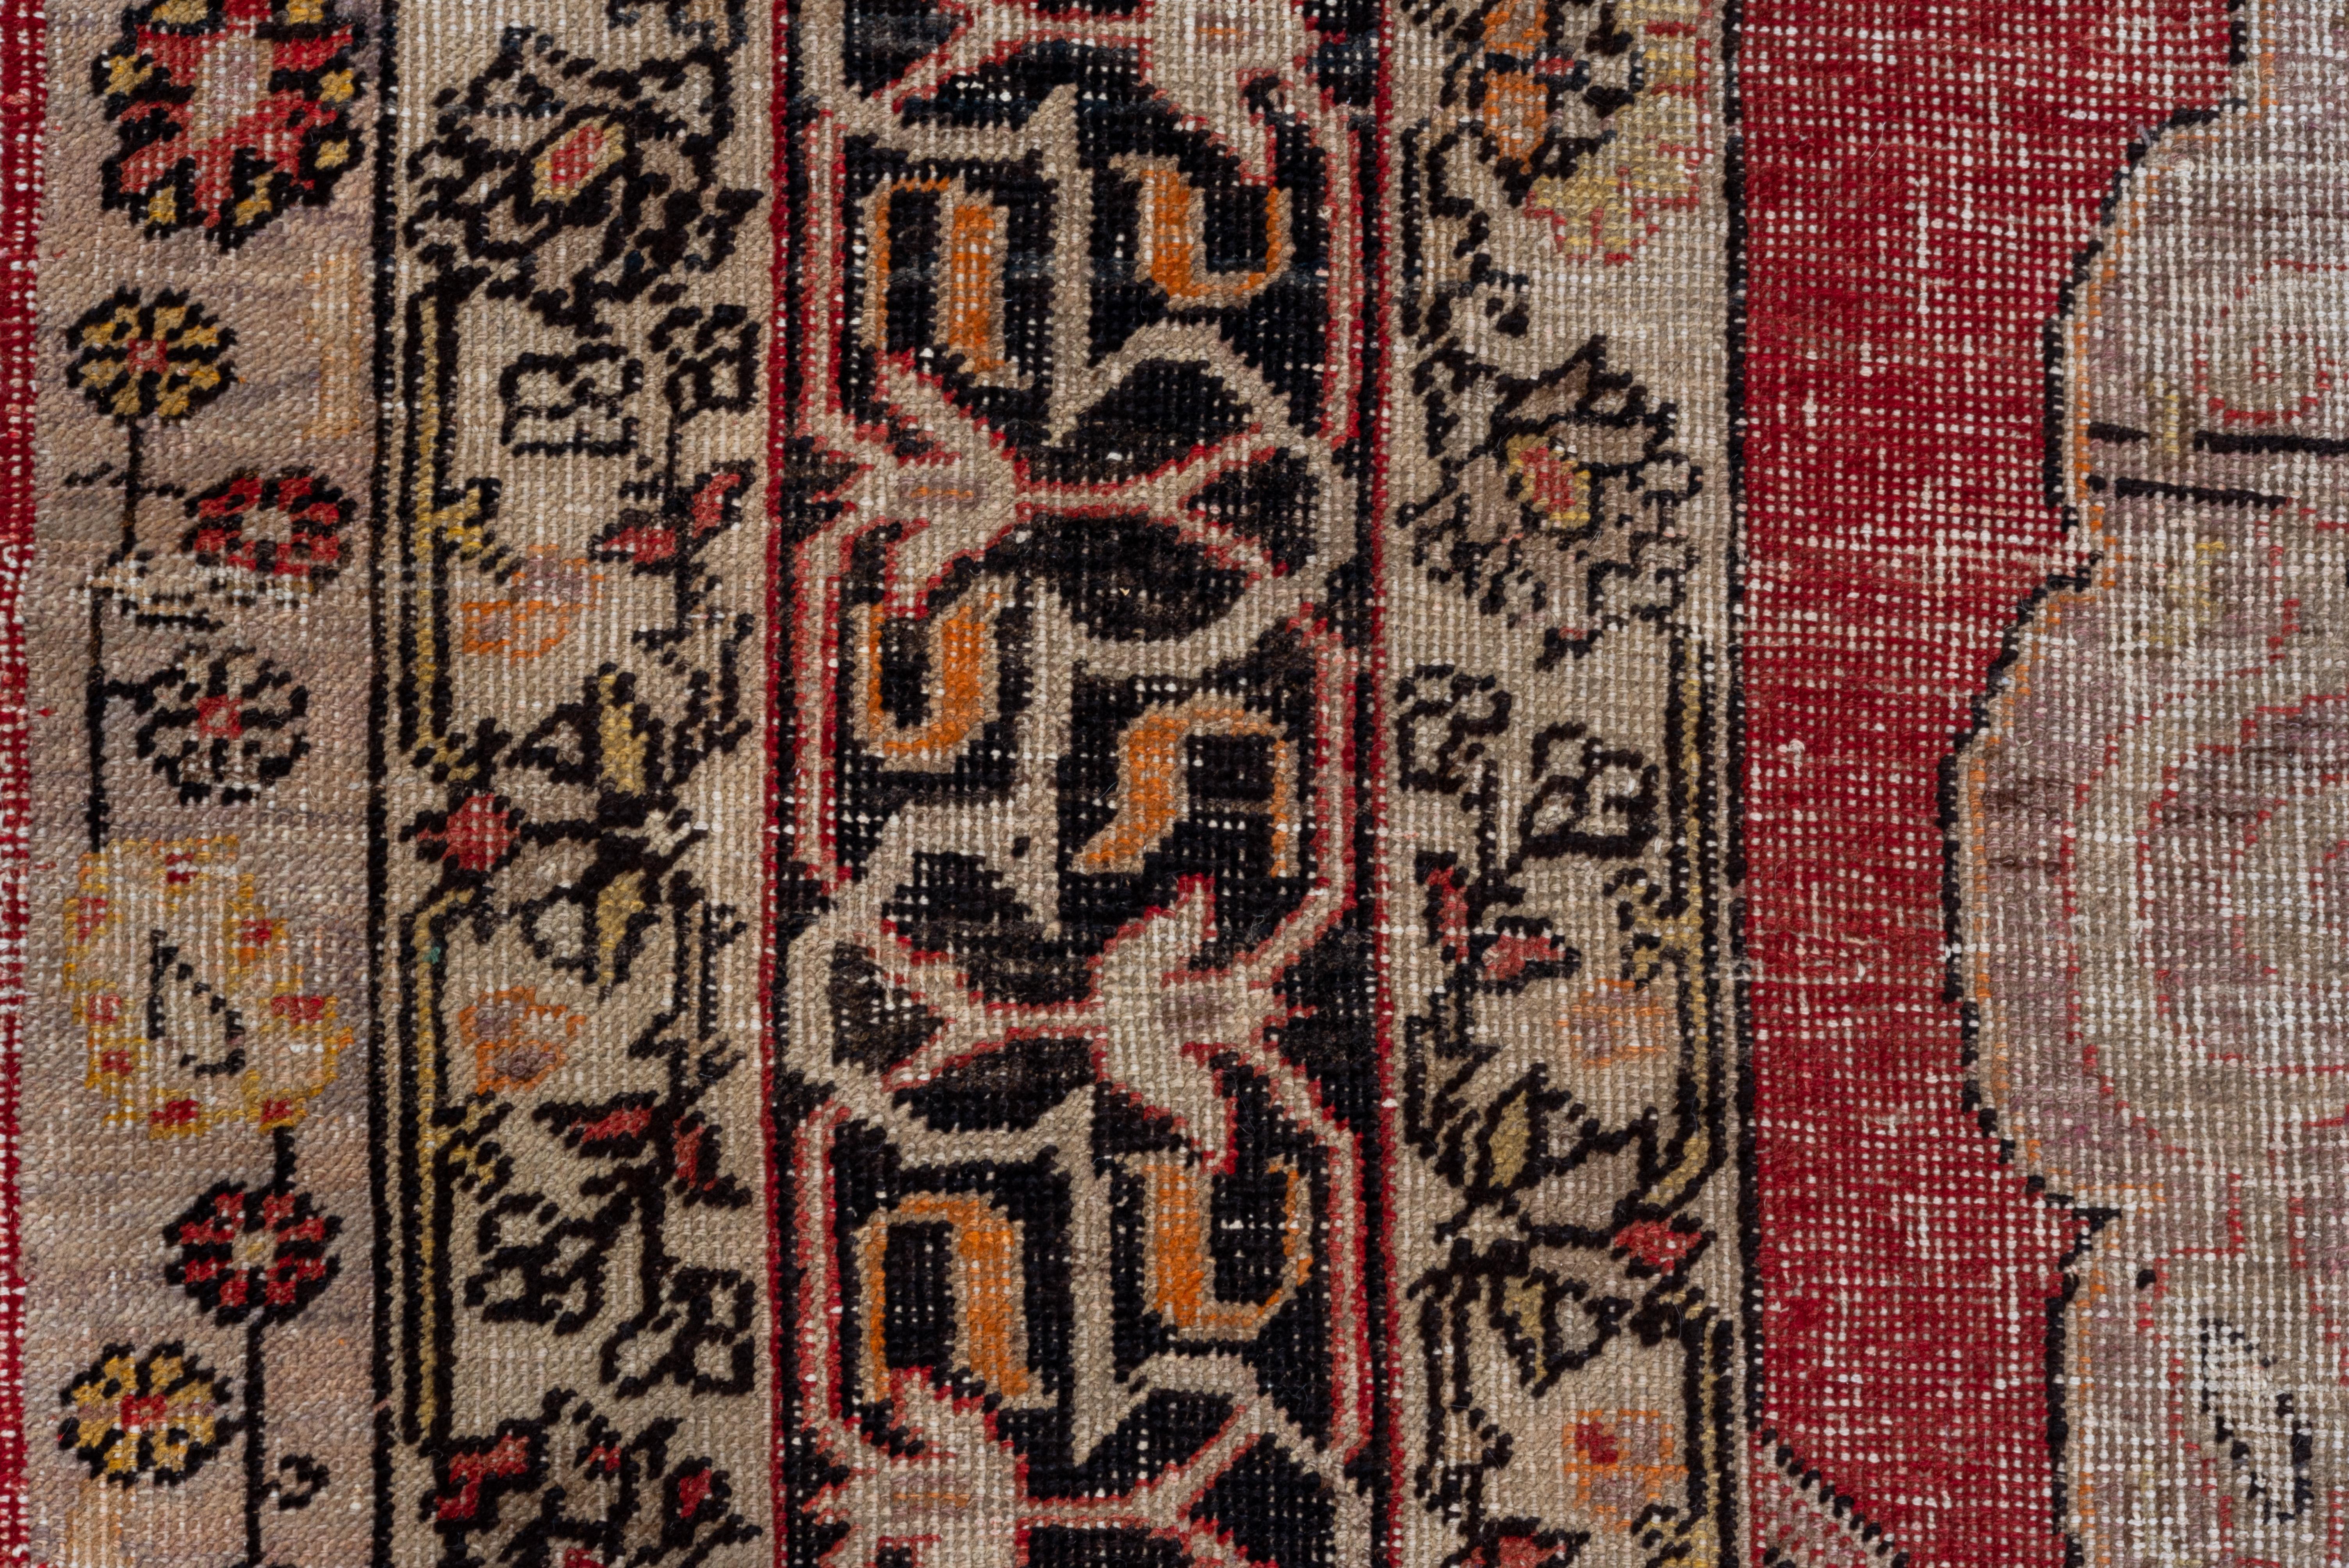 Although somewhat worn, this Oushak is better woven than most. The red field displays a giant ivory medallion with four scrolling field intrusions, giving the effect of giant blades. Cruciform palmette central motif in straw with enclosed palmettes.